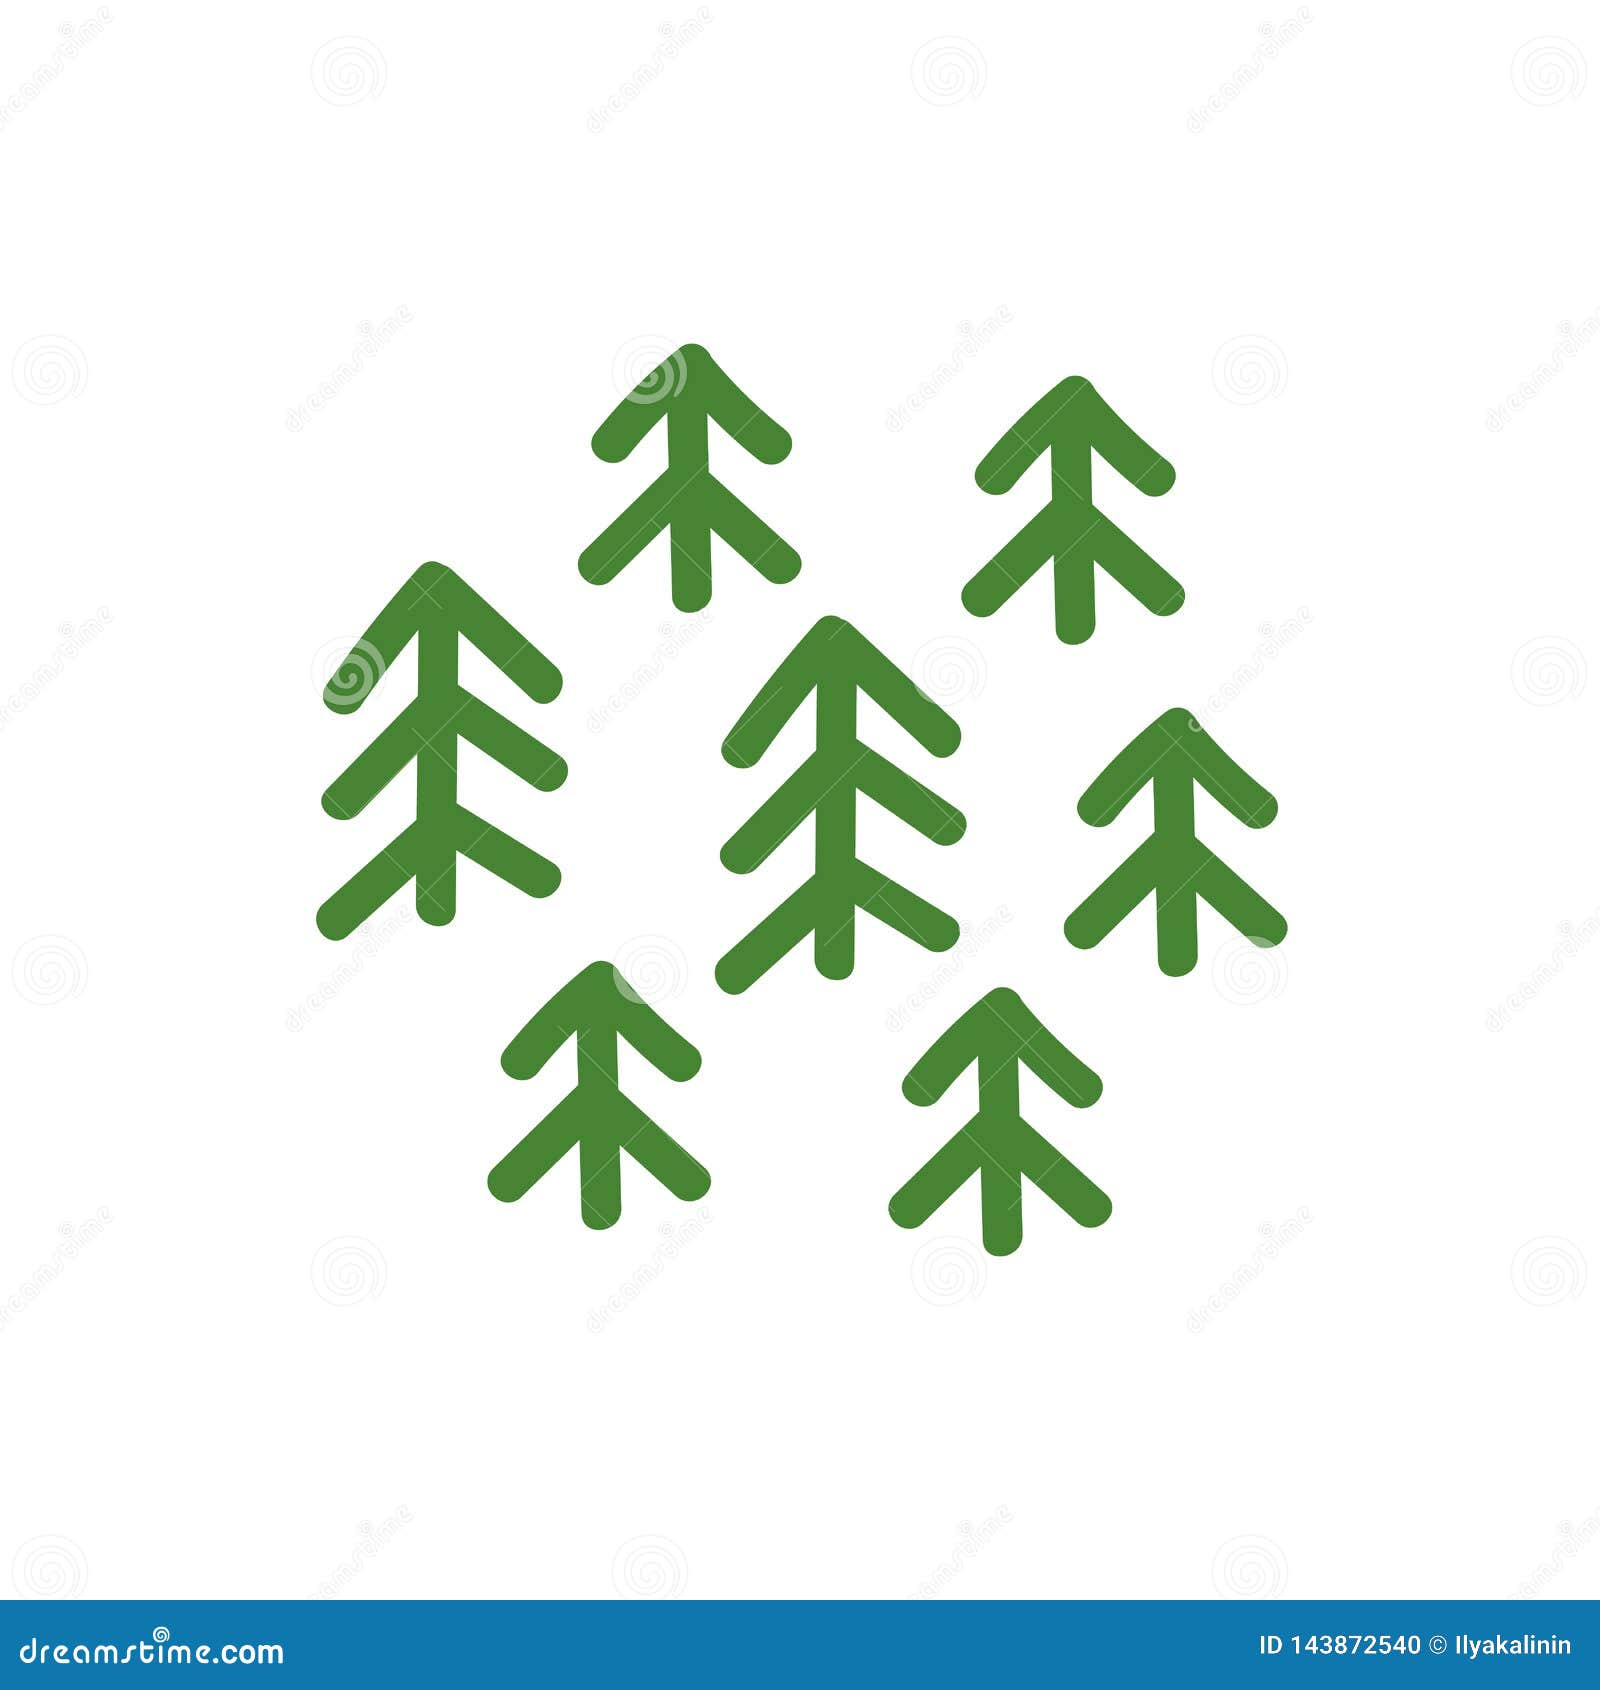 green spruce forest. cartographic ation. plants icon or logo. ecology purity and nature. national park